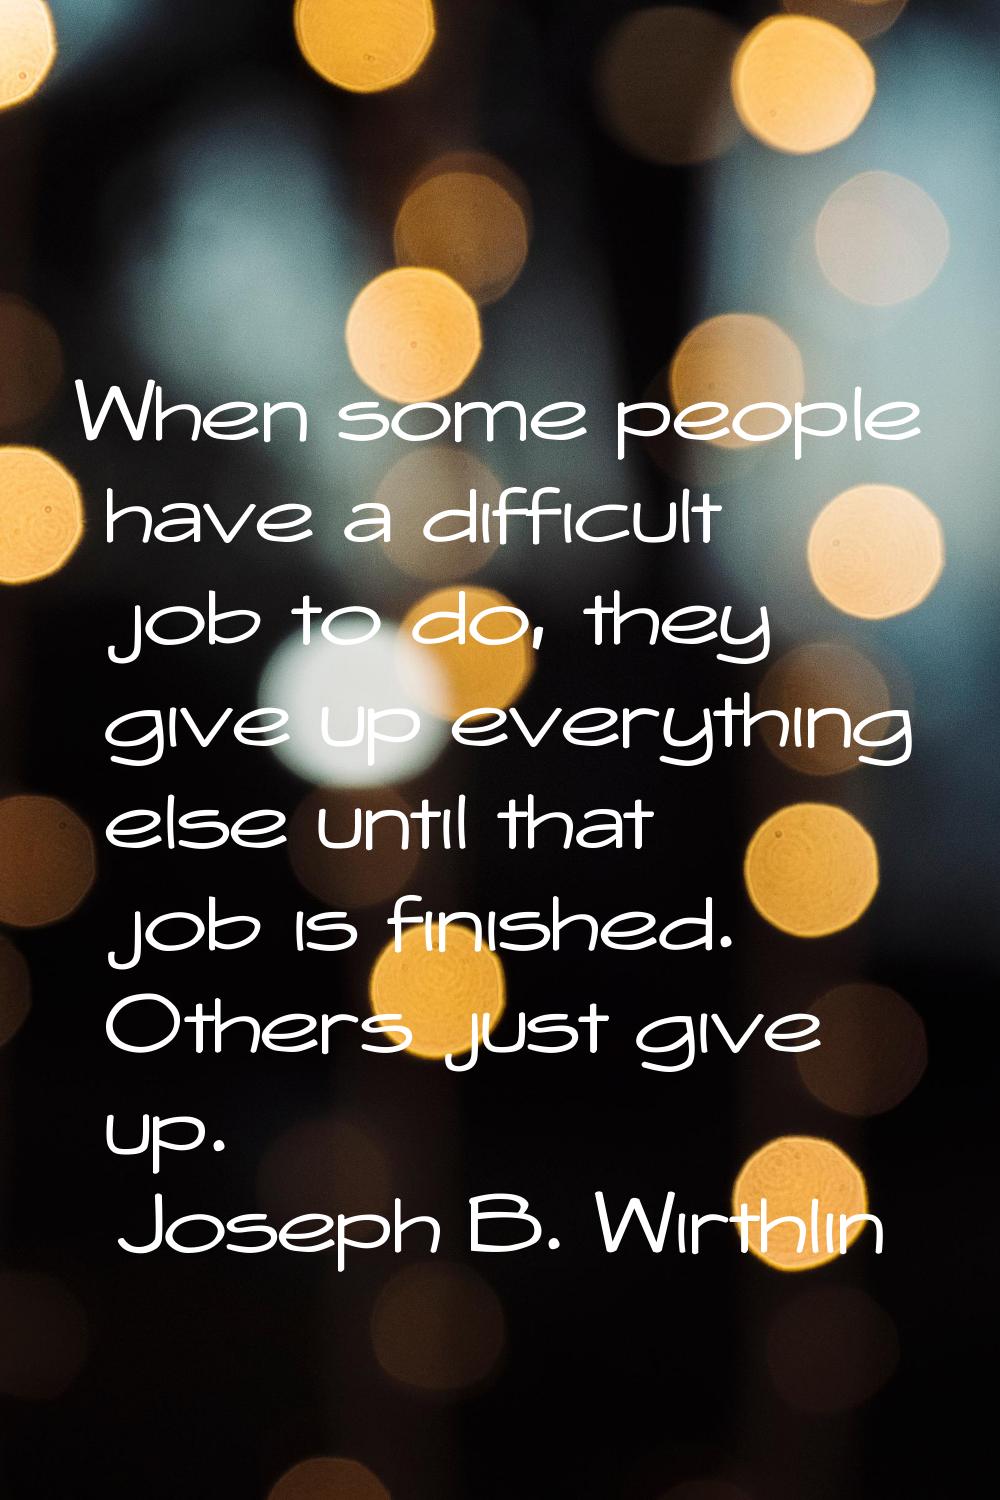 When some people have a difficult job to do, they give up everything else until that job is finishe